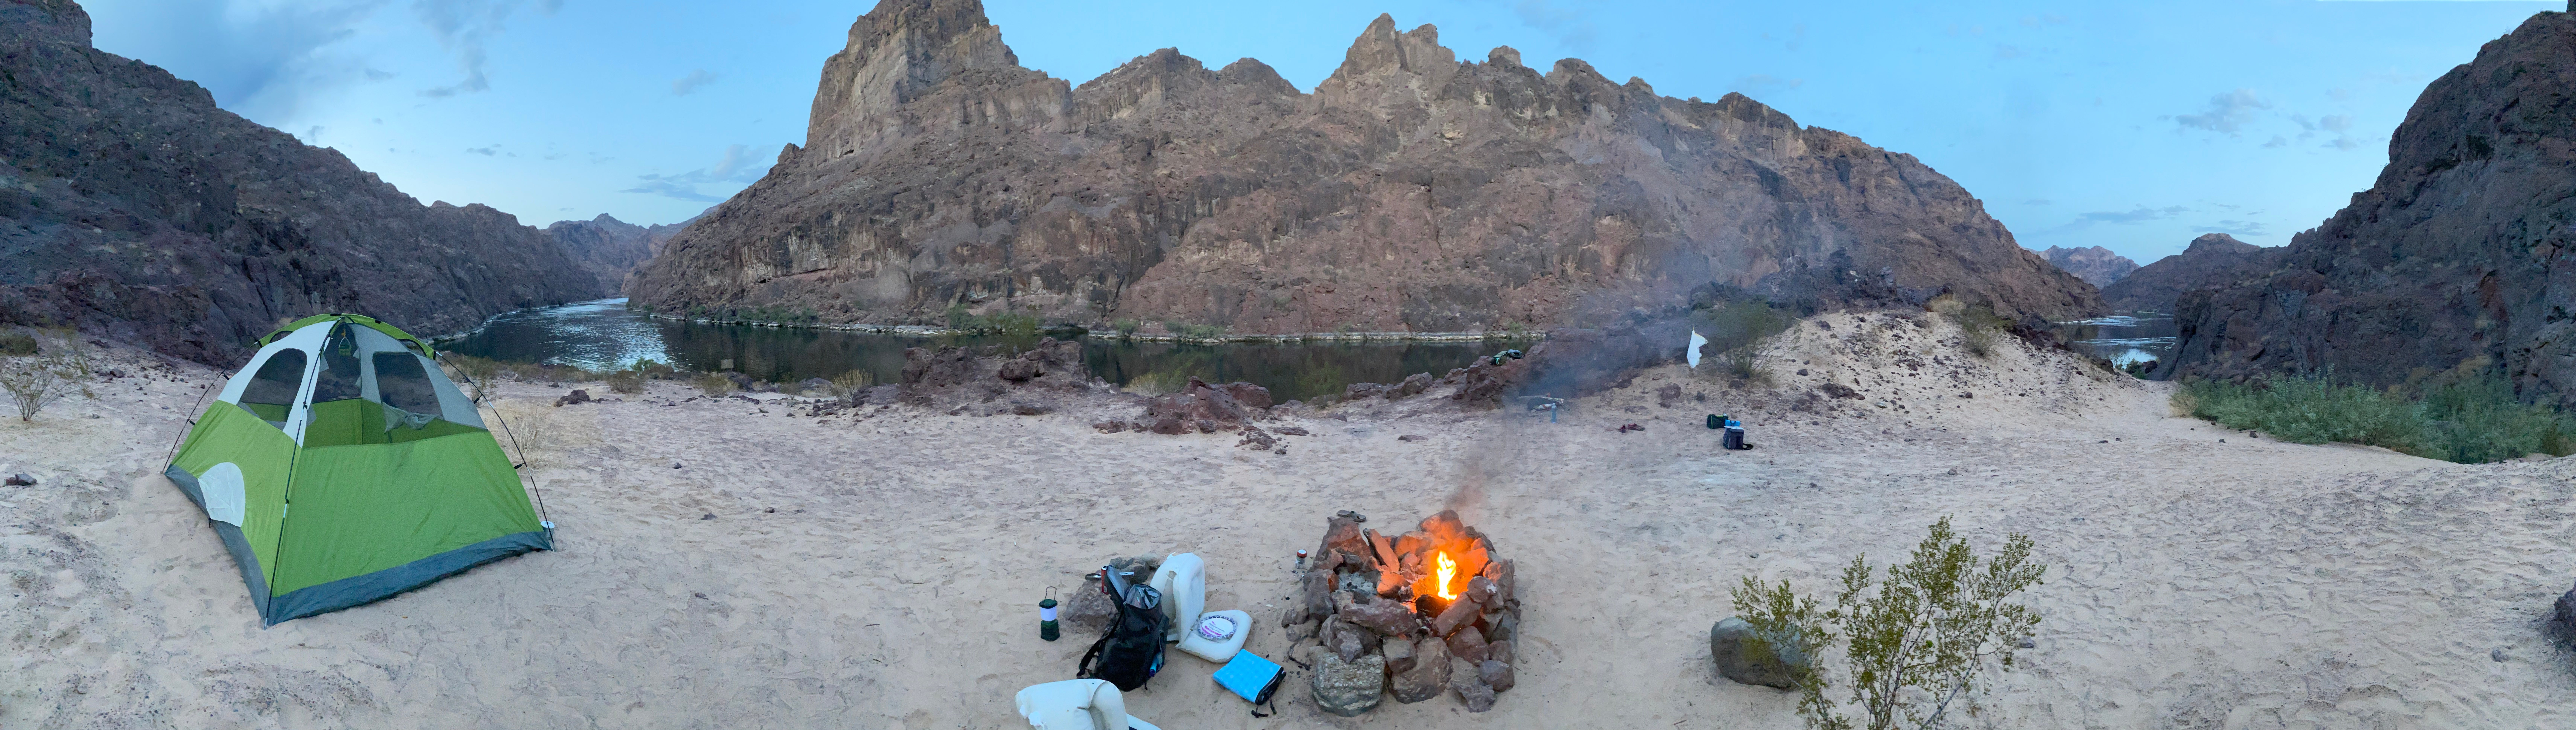 Camper submitted image from Arizona Hot Springs — Lake Mead National Recreation Area - 1